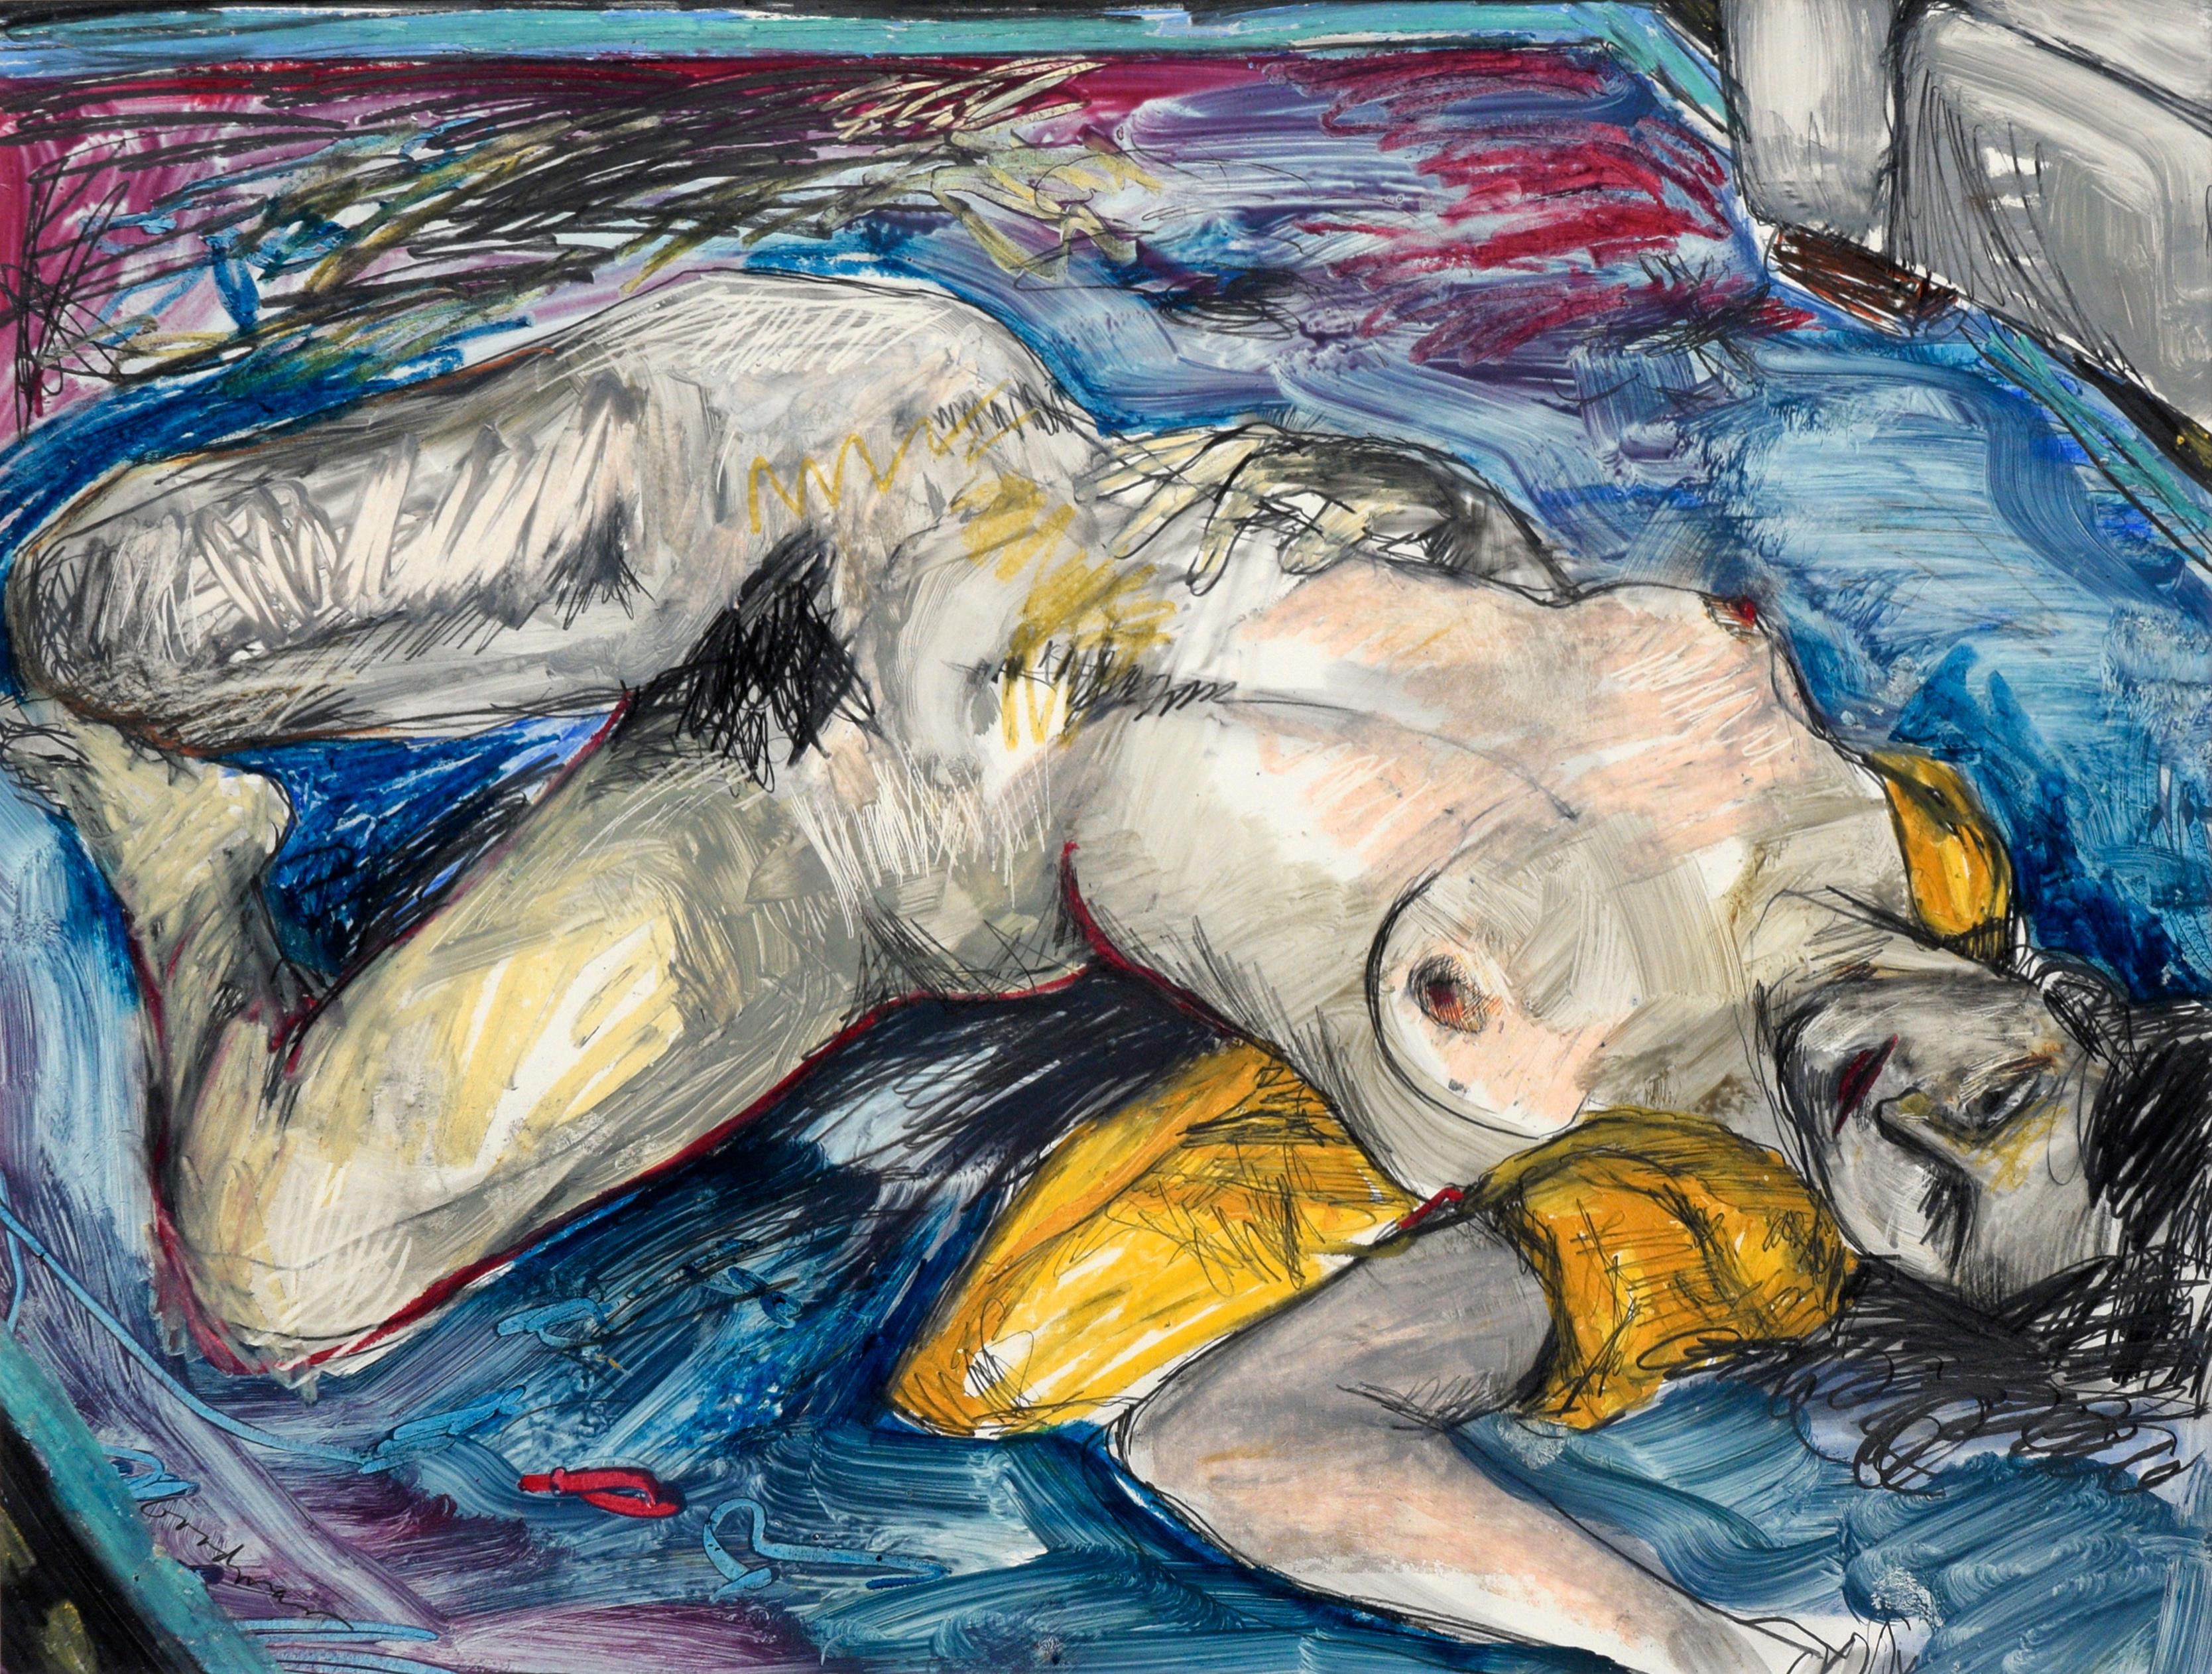 Reclining Expressionist Nude Female Figure with Yellow, Blue, and Magenta - Painting by Linda Goodman